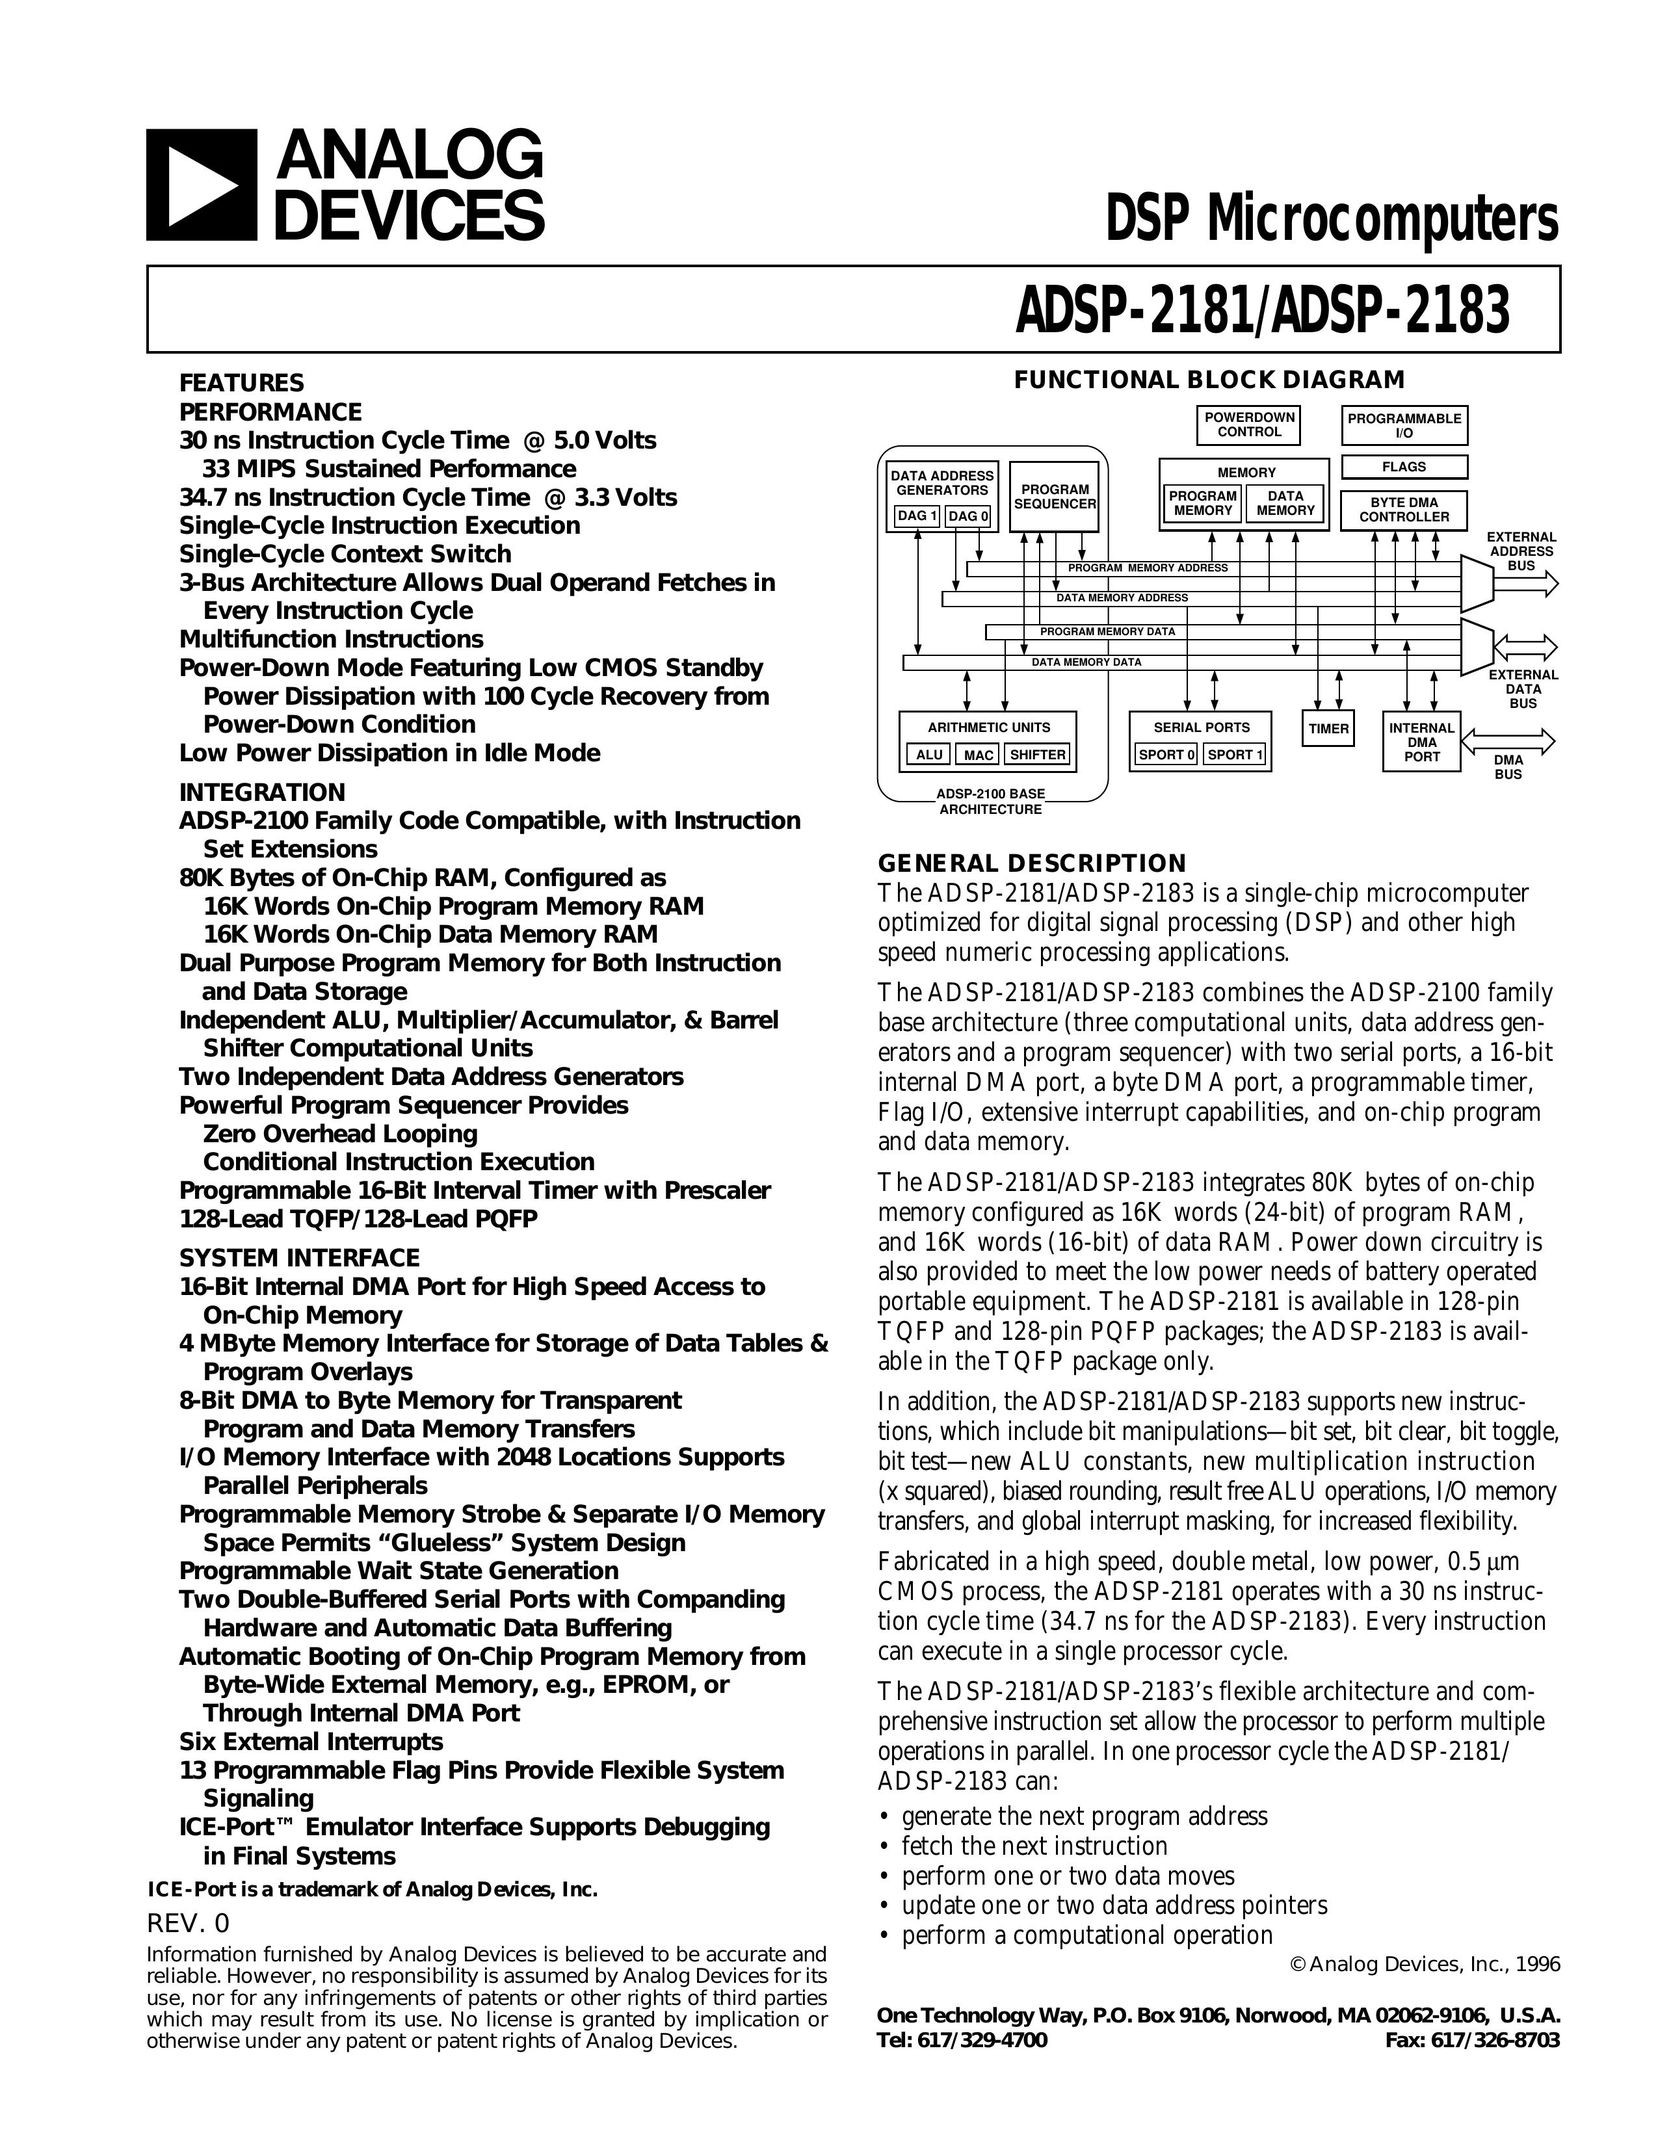 Analog Devices ADSP-2183 Network Card User Manual